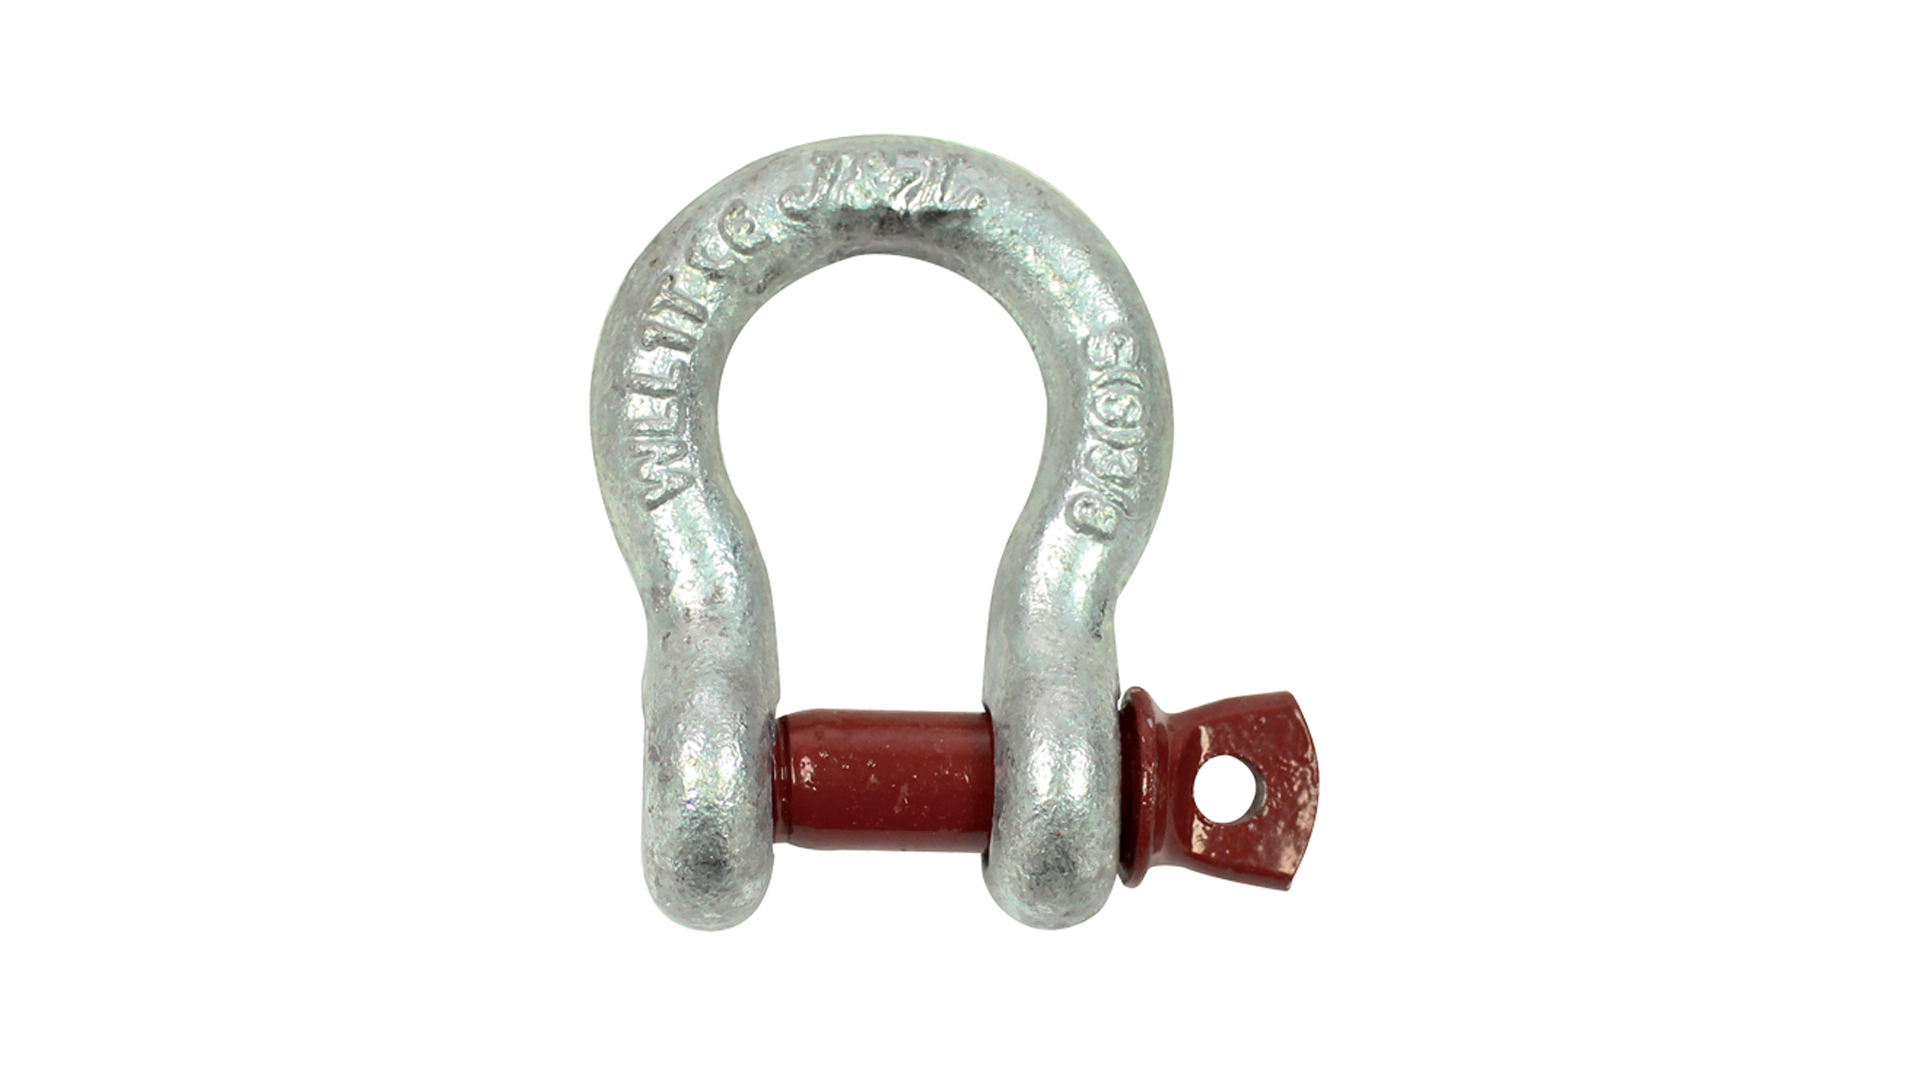 Hire 3.25 ton rigging lifting bow shackle in Cardiff, Newport, Swansea, Carmarthenshire, Pembrokeshire & South West Wales